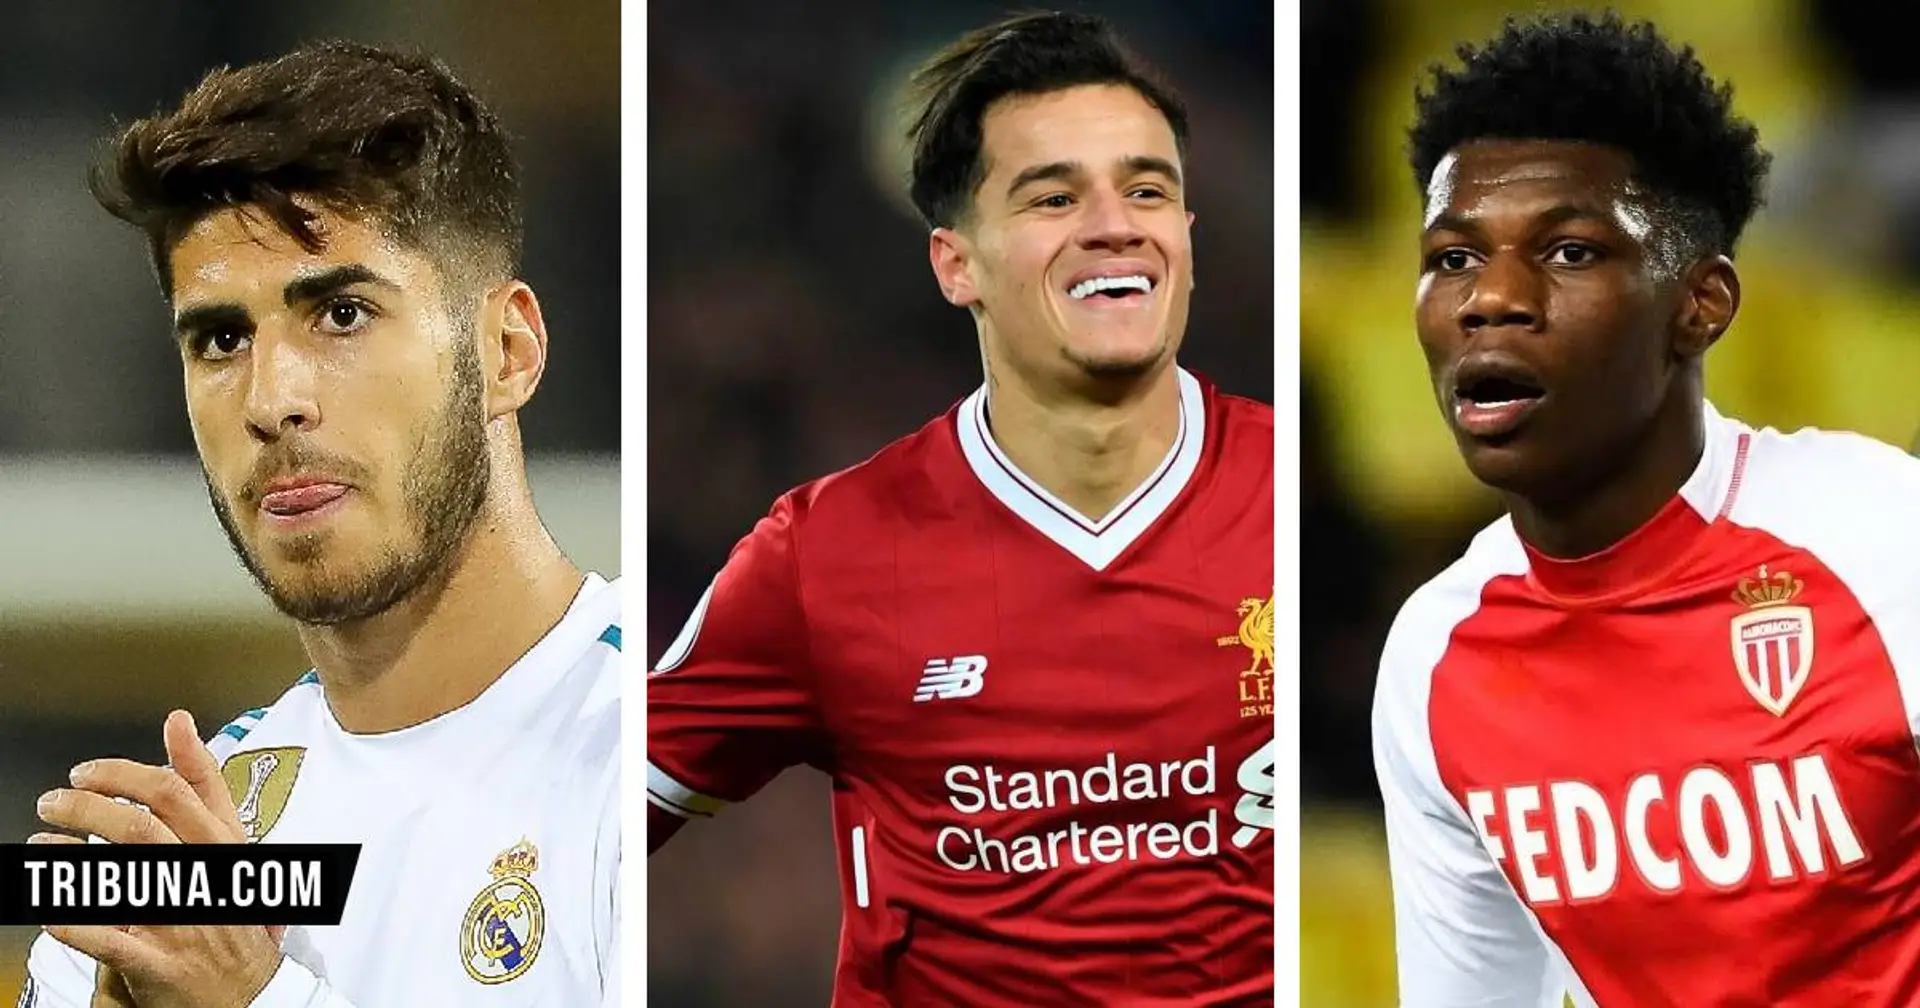 Goalscoring, defensive or box-to-box - which type of midfielder do Liverpool need the most?